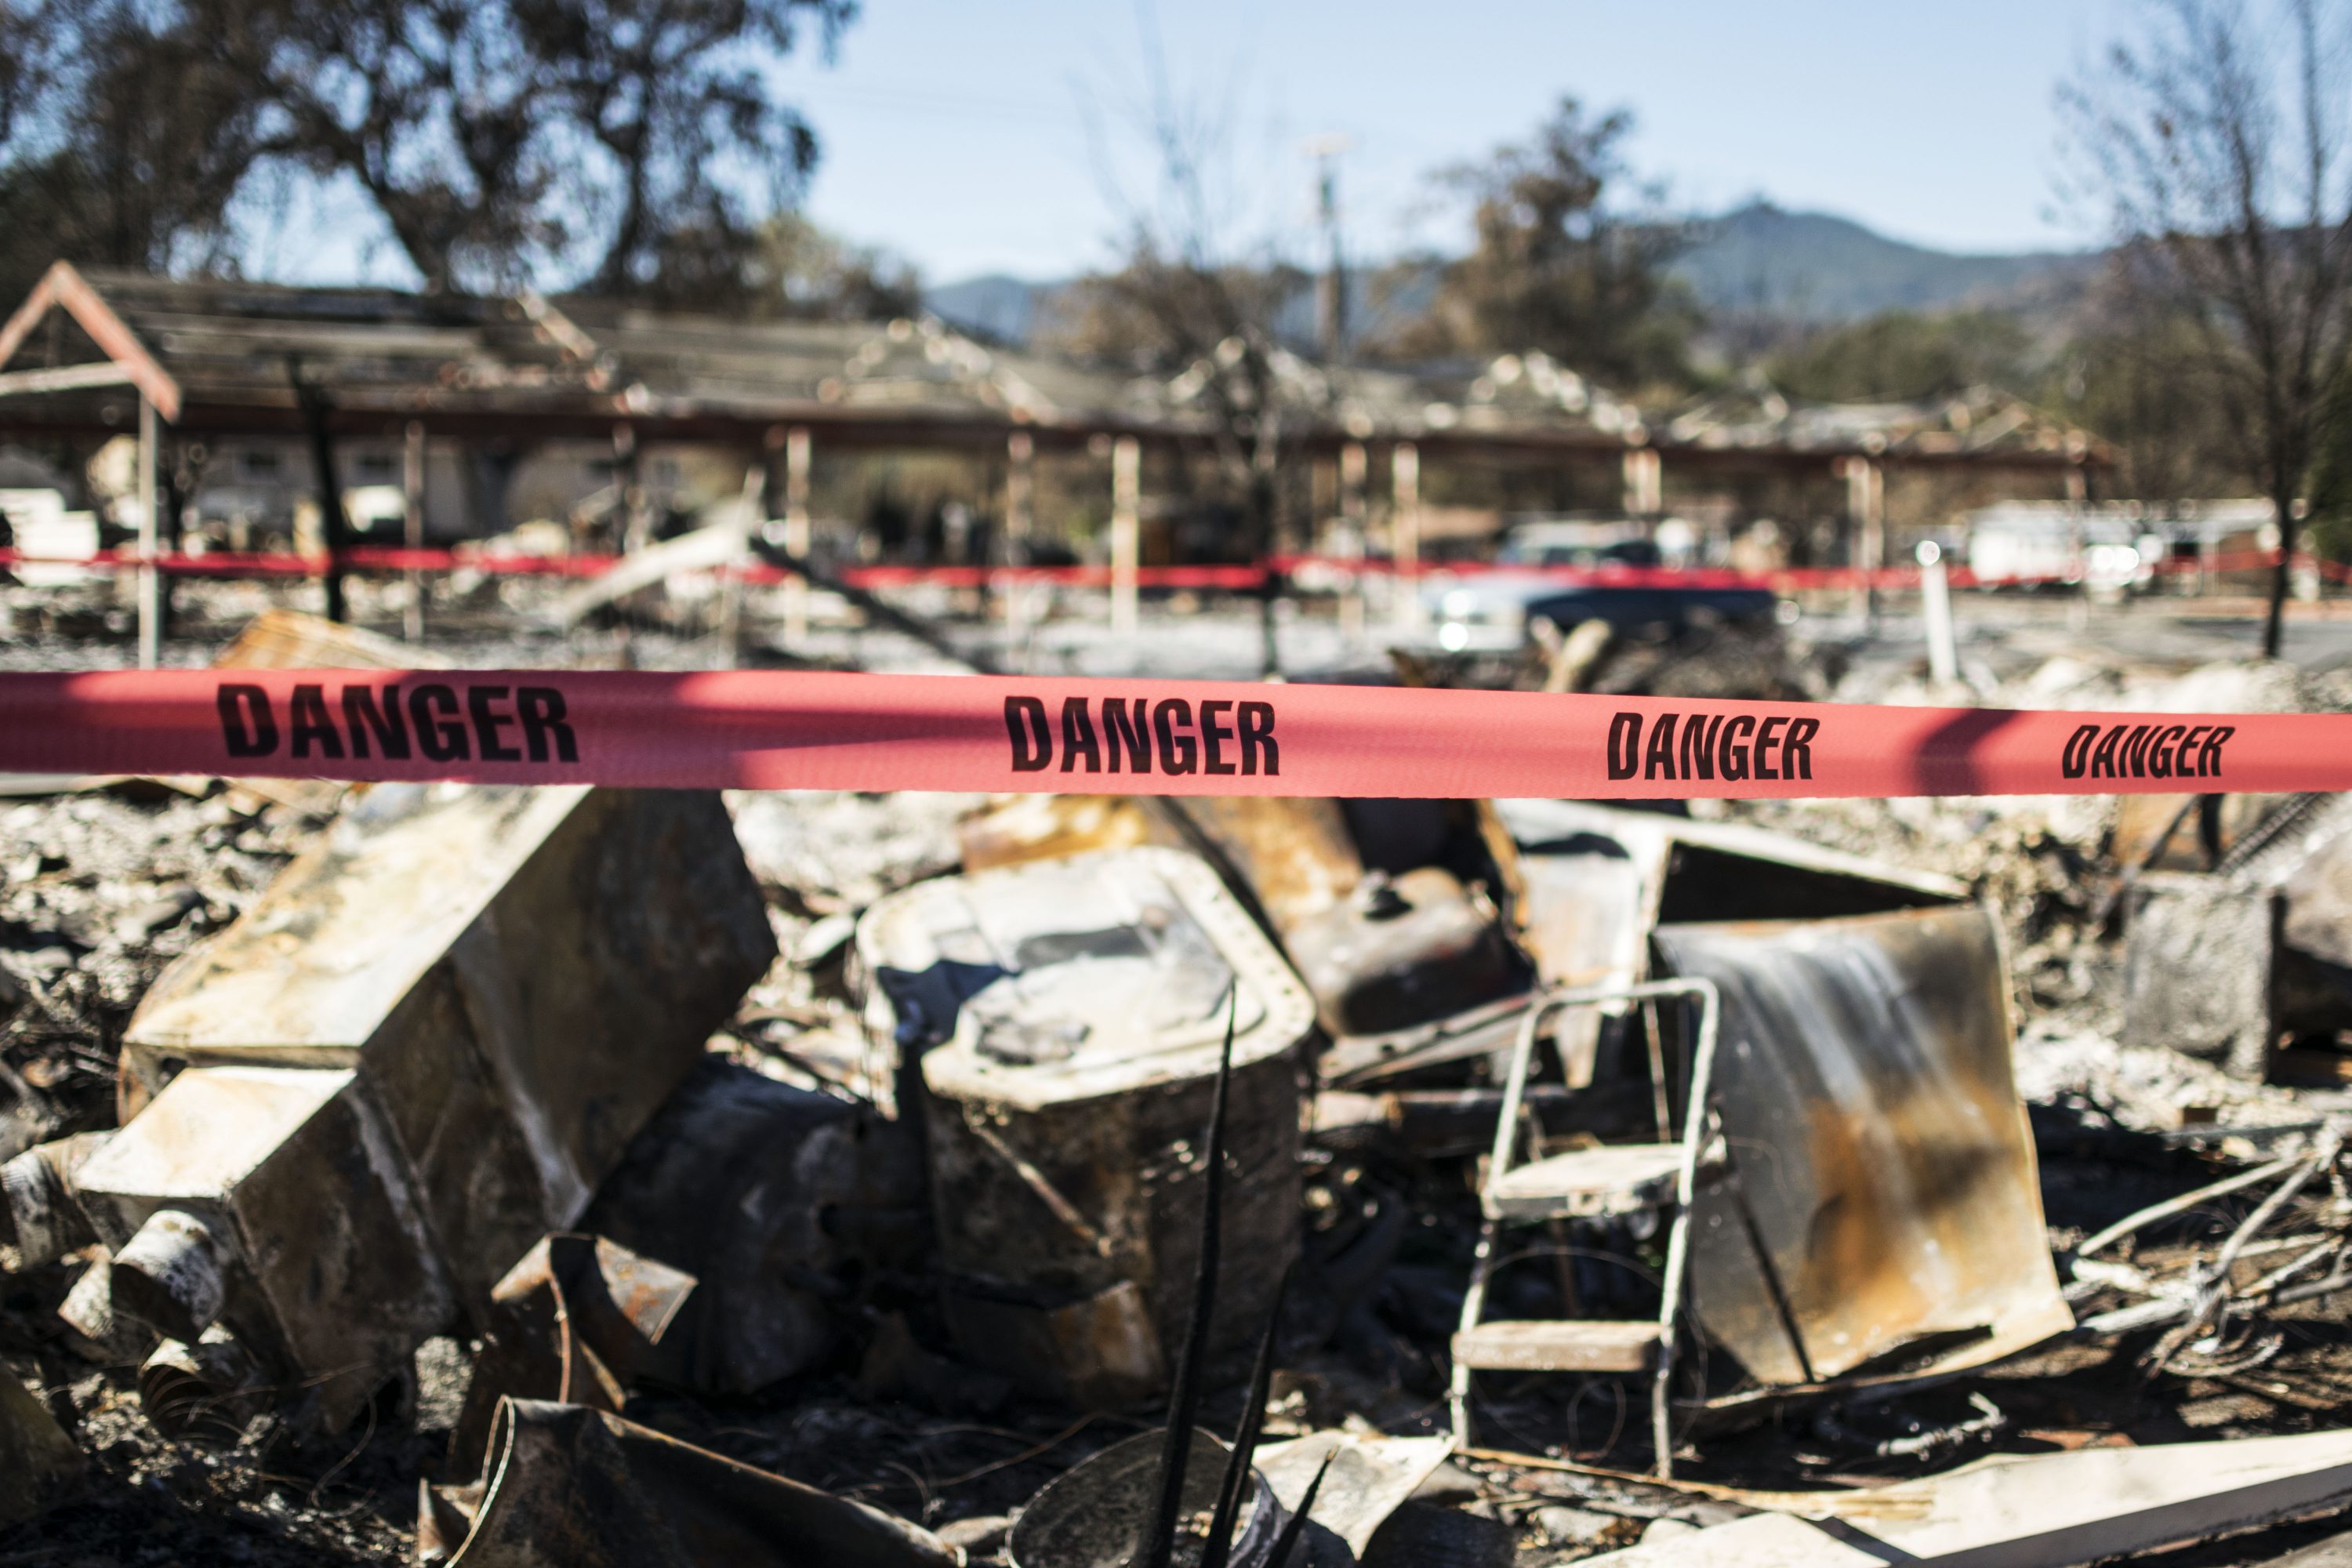 Photo: A strip of red caution tape that reads "Danger" warns against entering the area of burned debris seen in the background.